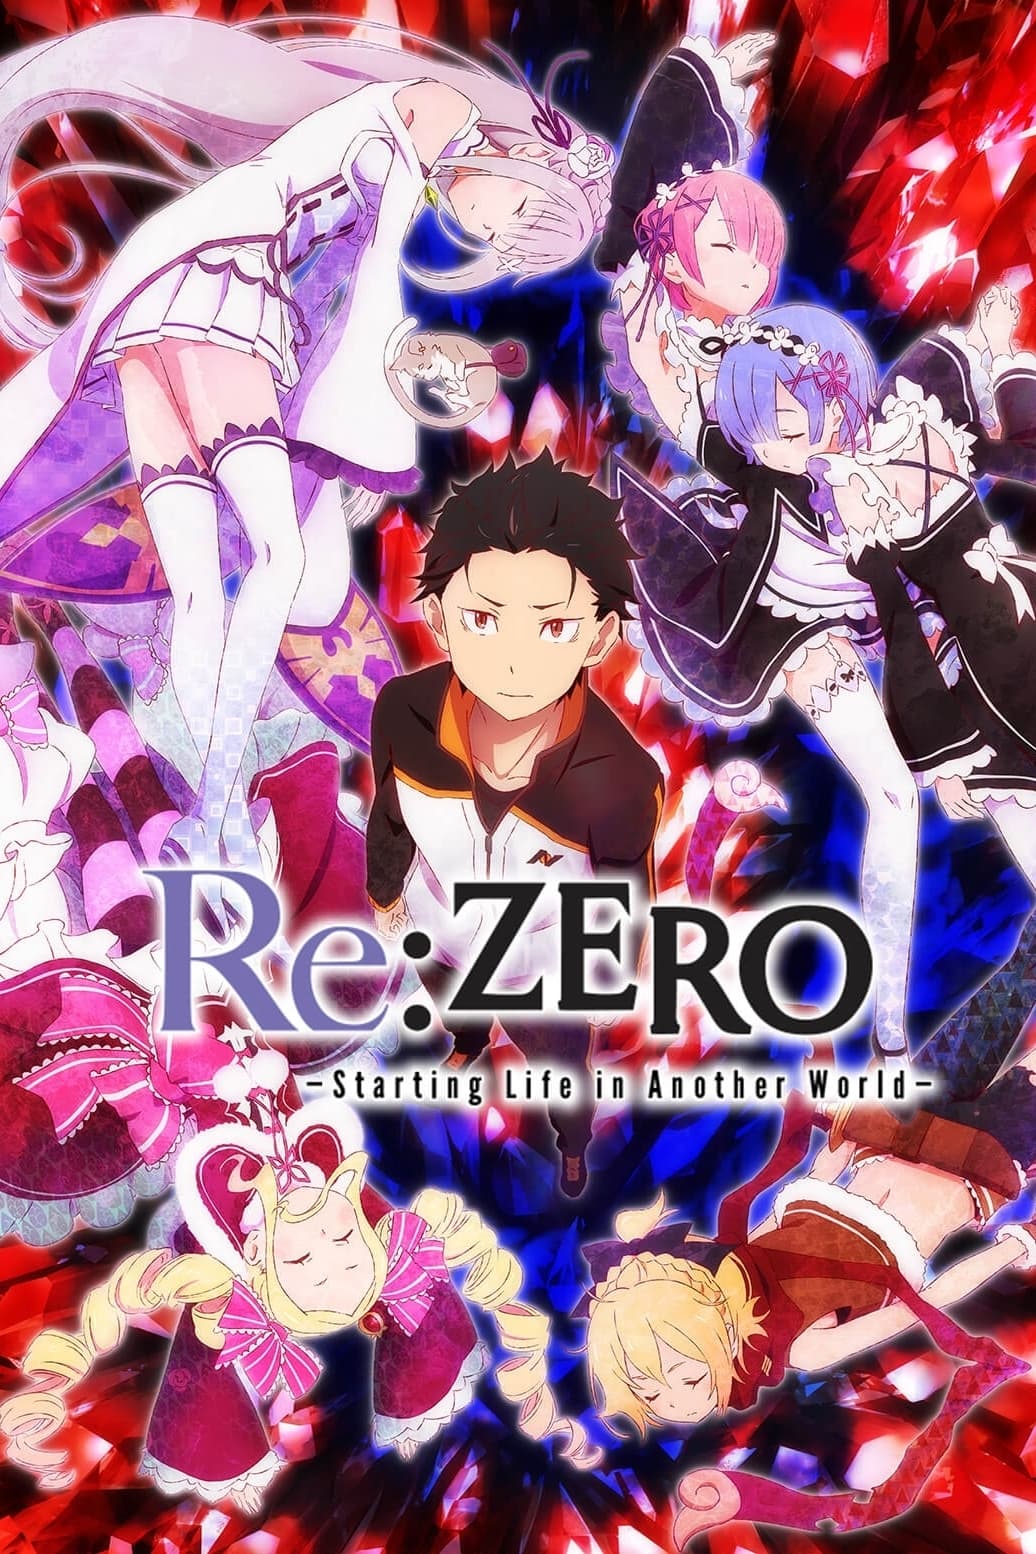 Re:ZERO -Starting Life in Another World- (2016)